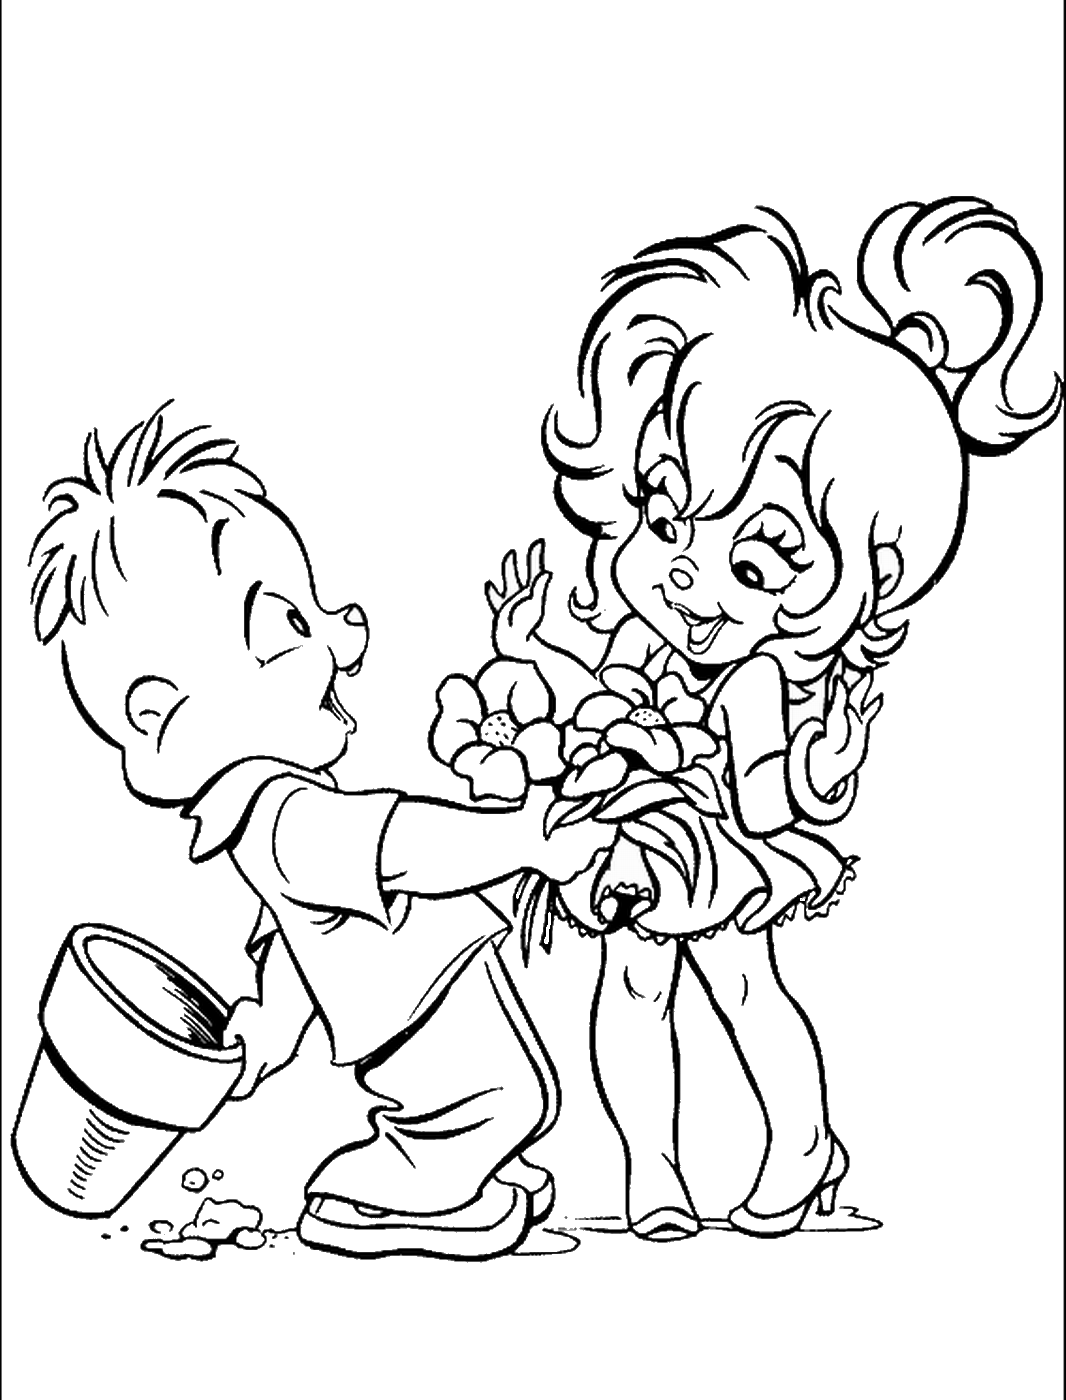 Alvin and the Chipmunks Coloring Pages TV Film alvin_cl_7 Printable 2020 00065 Coloring4free